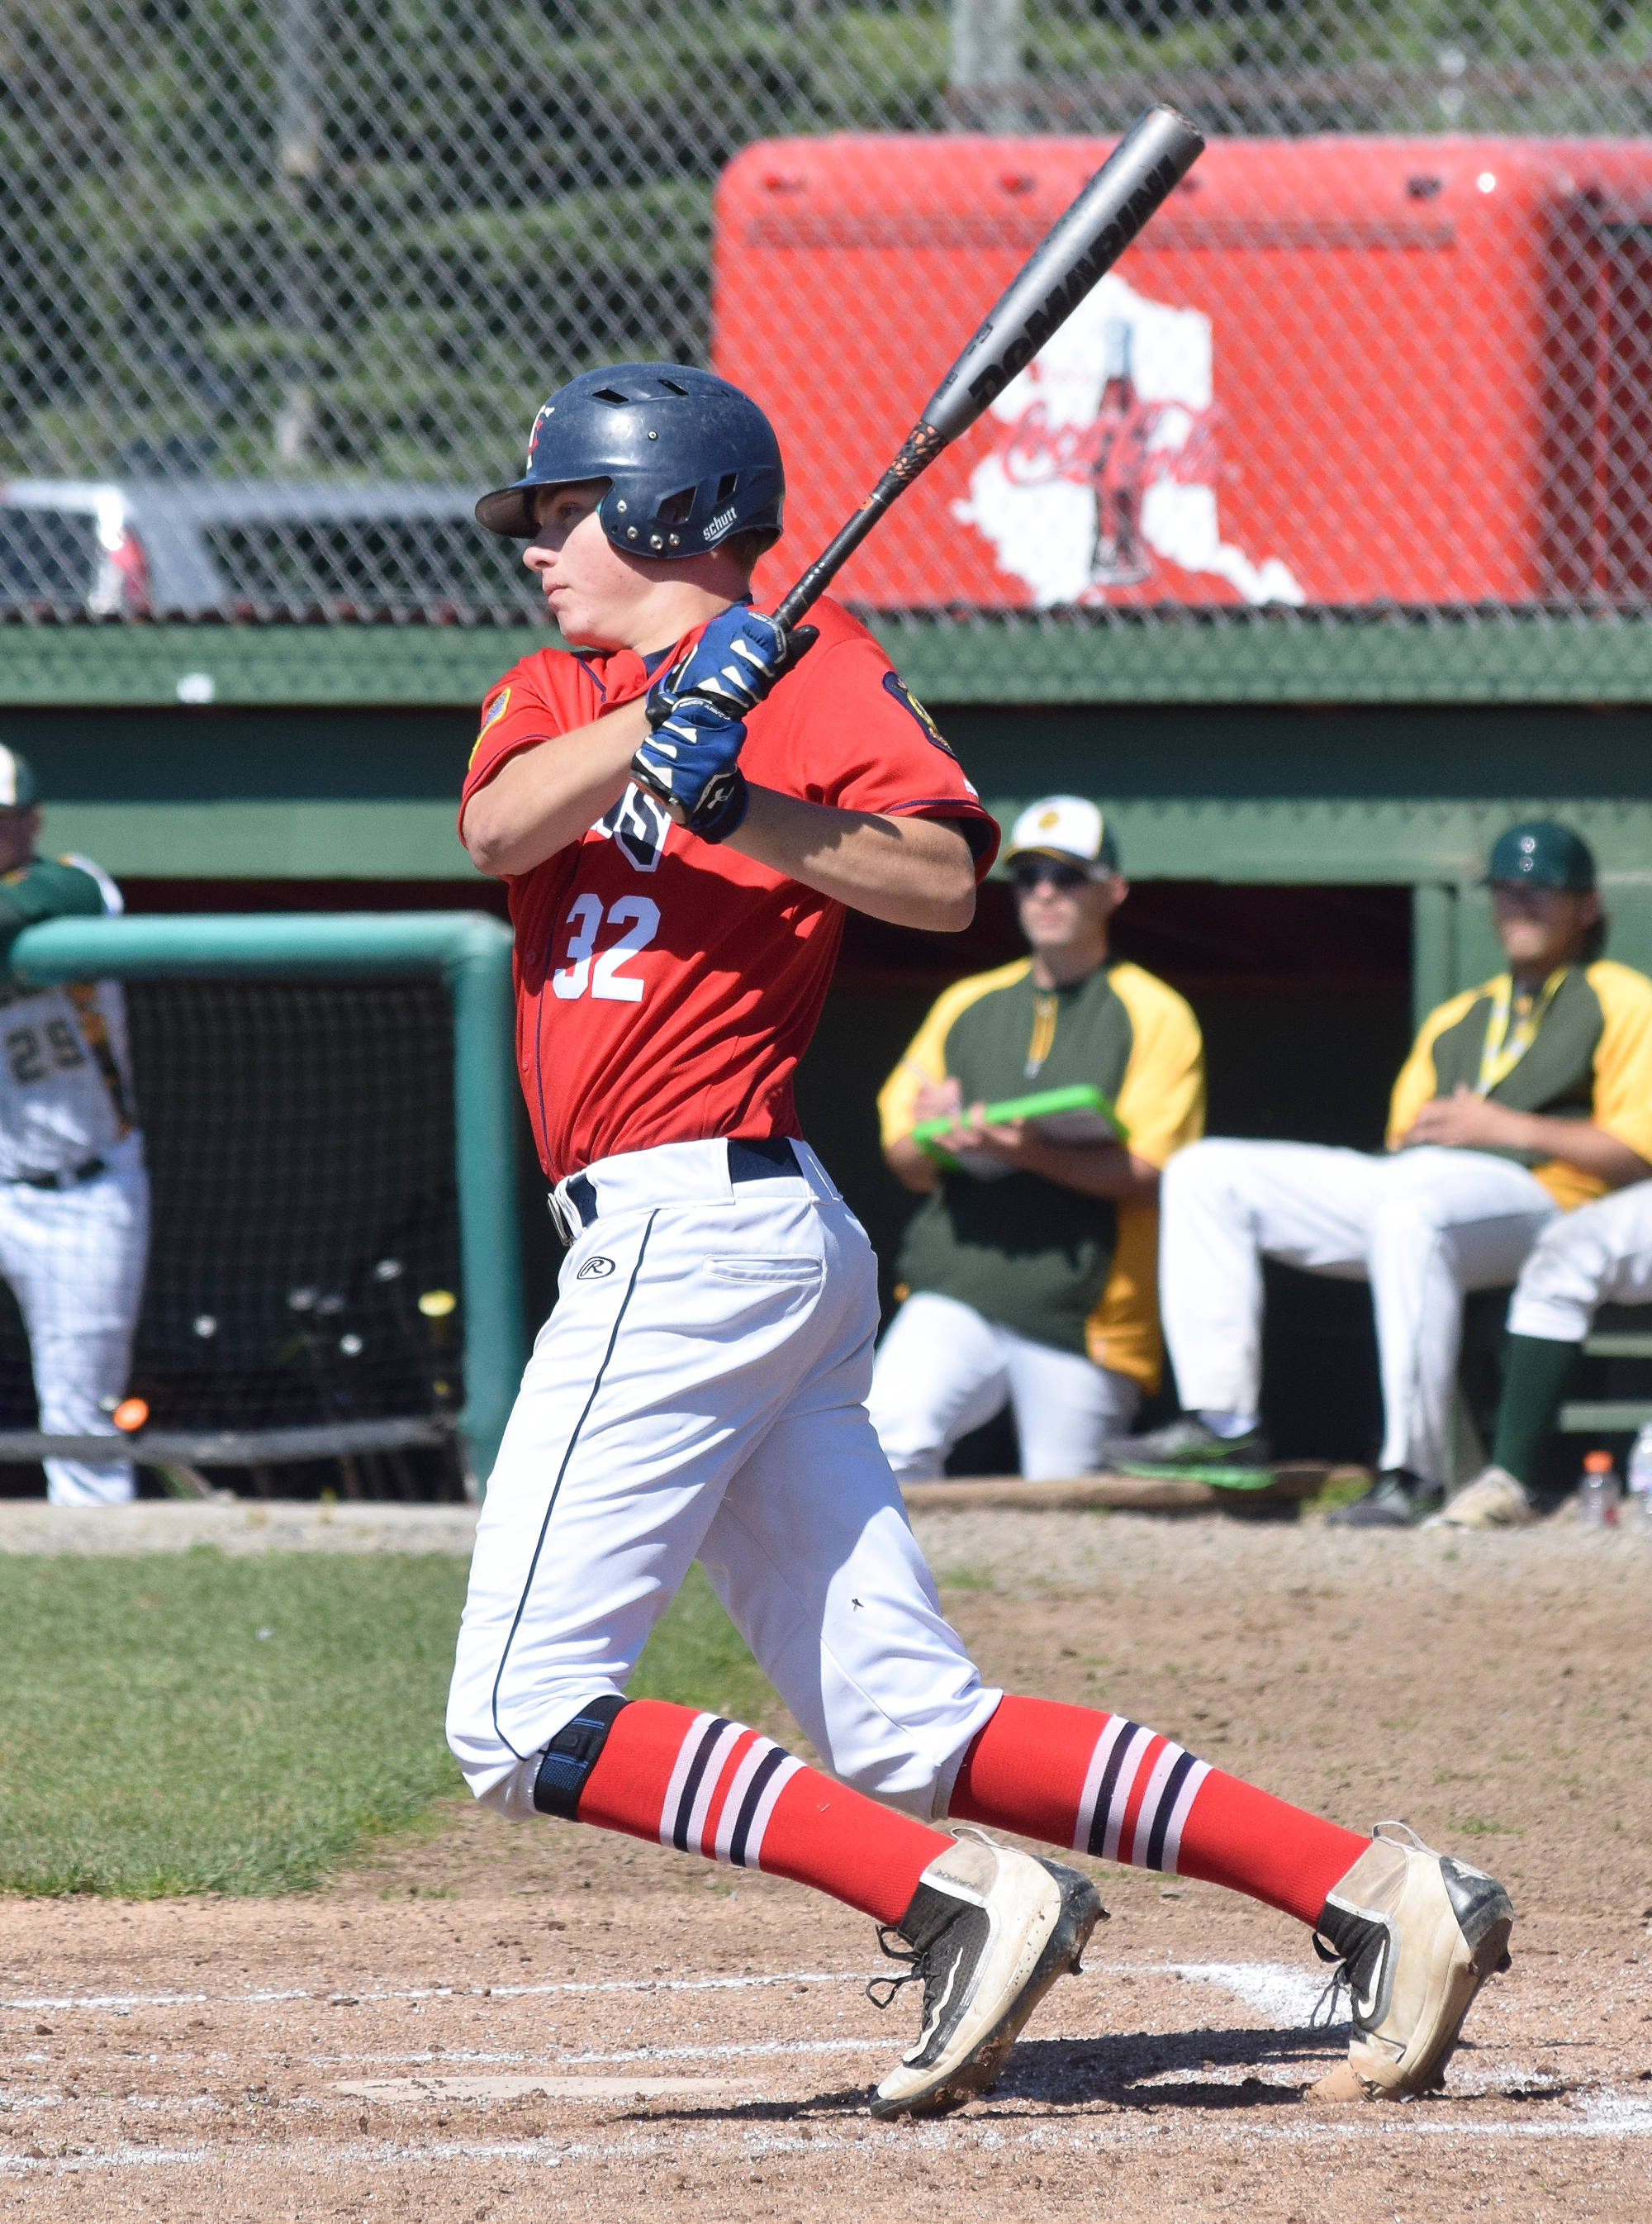 Twins batter Adam Brinster hits a single Tuesday afternoon against Service at Coral Seymour Memorial Ballpark in Kenai. (Photo by Joey Klecka/Peninsula Clarion)